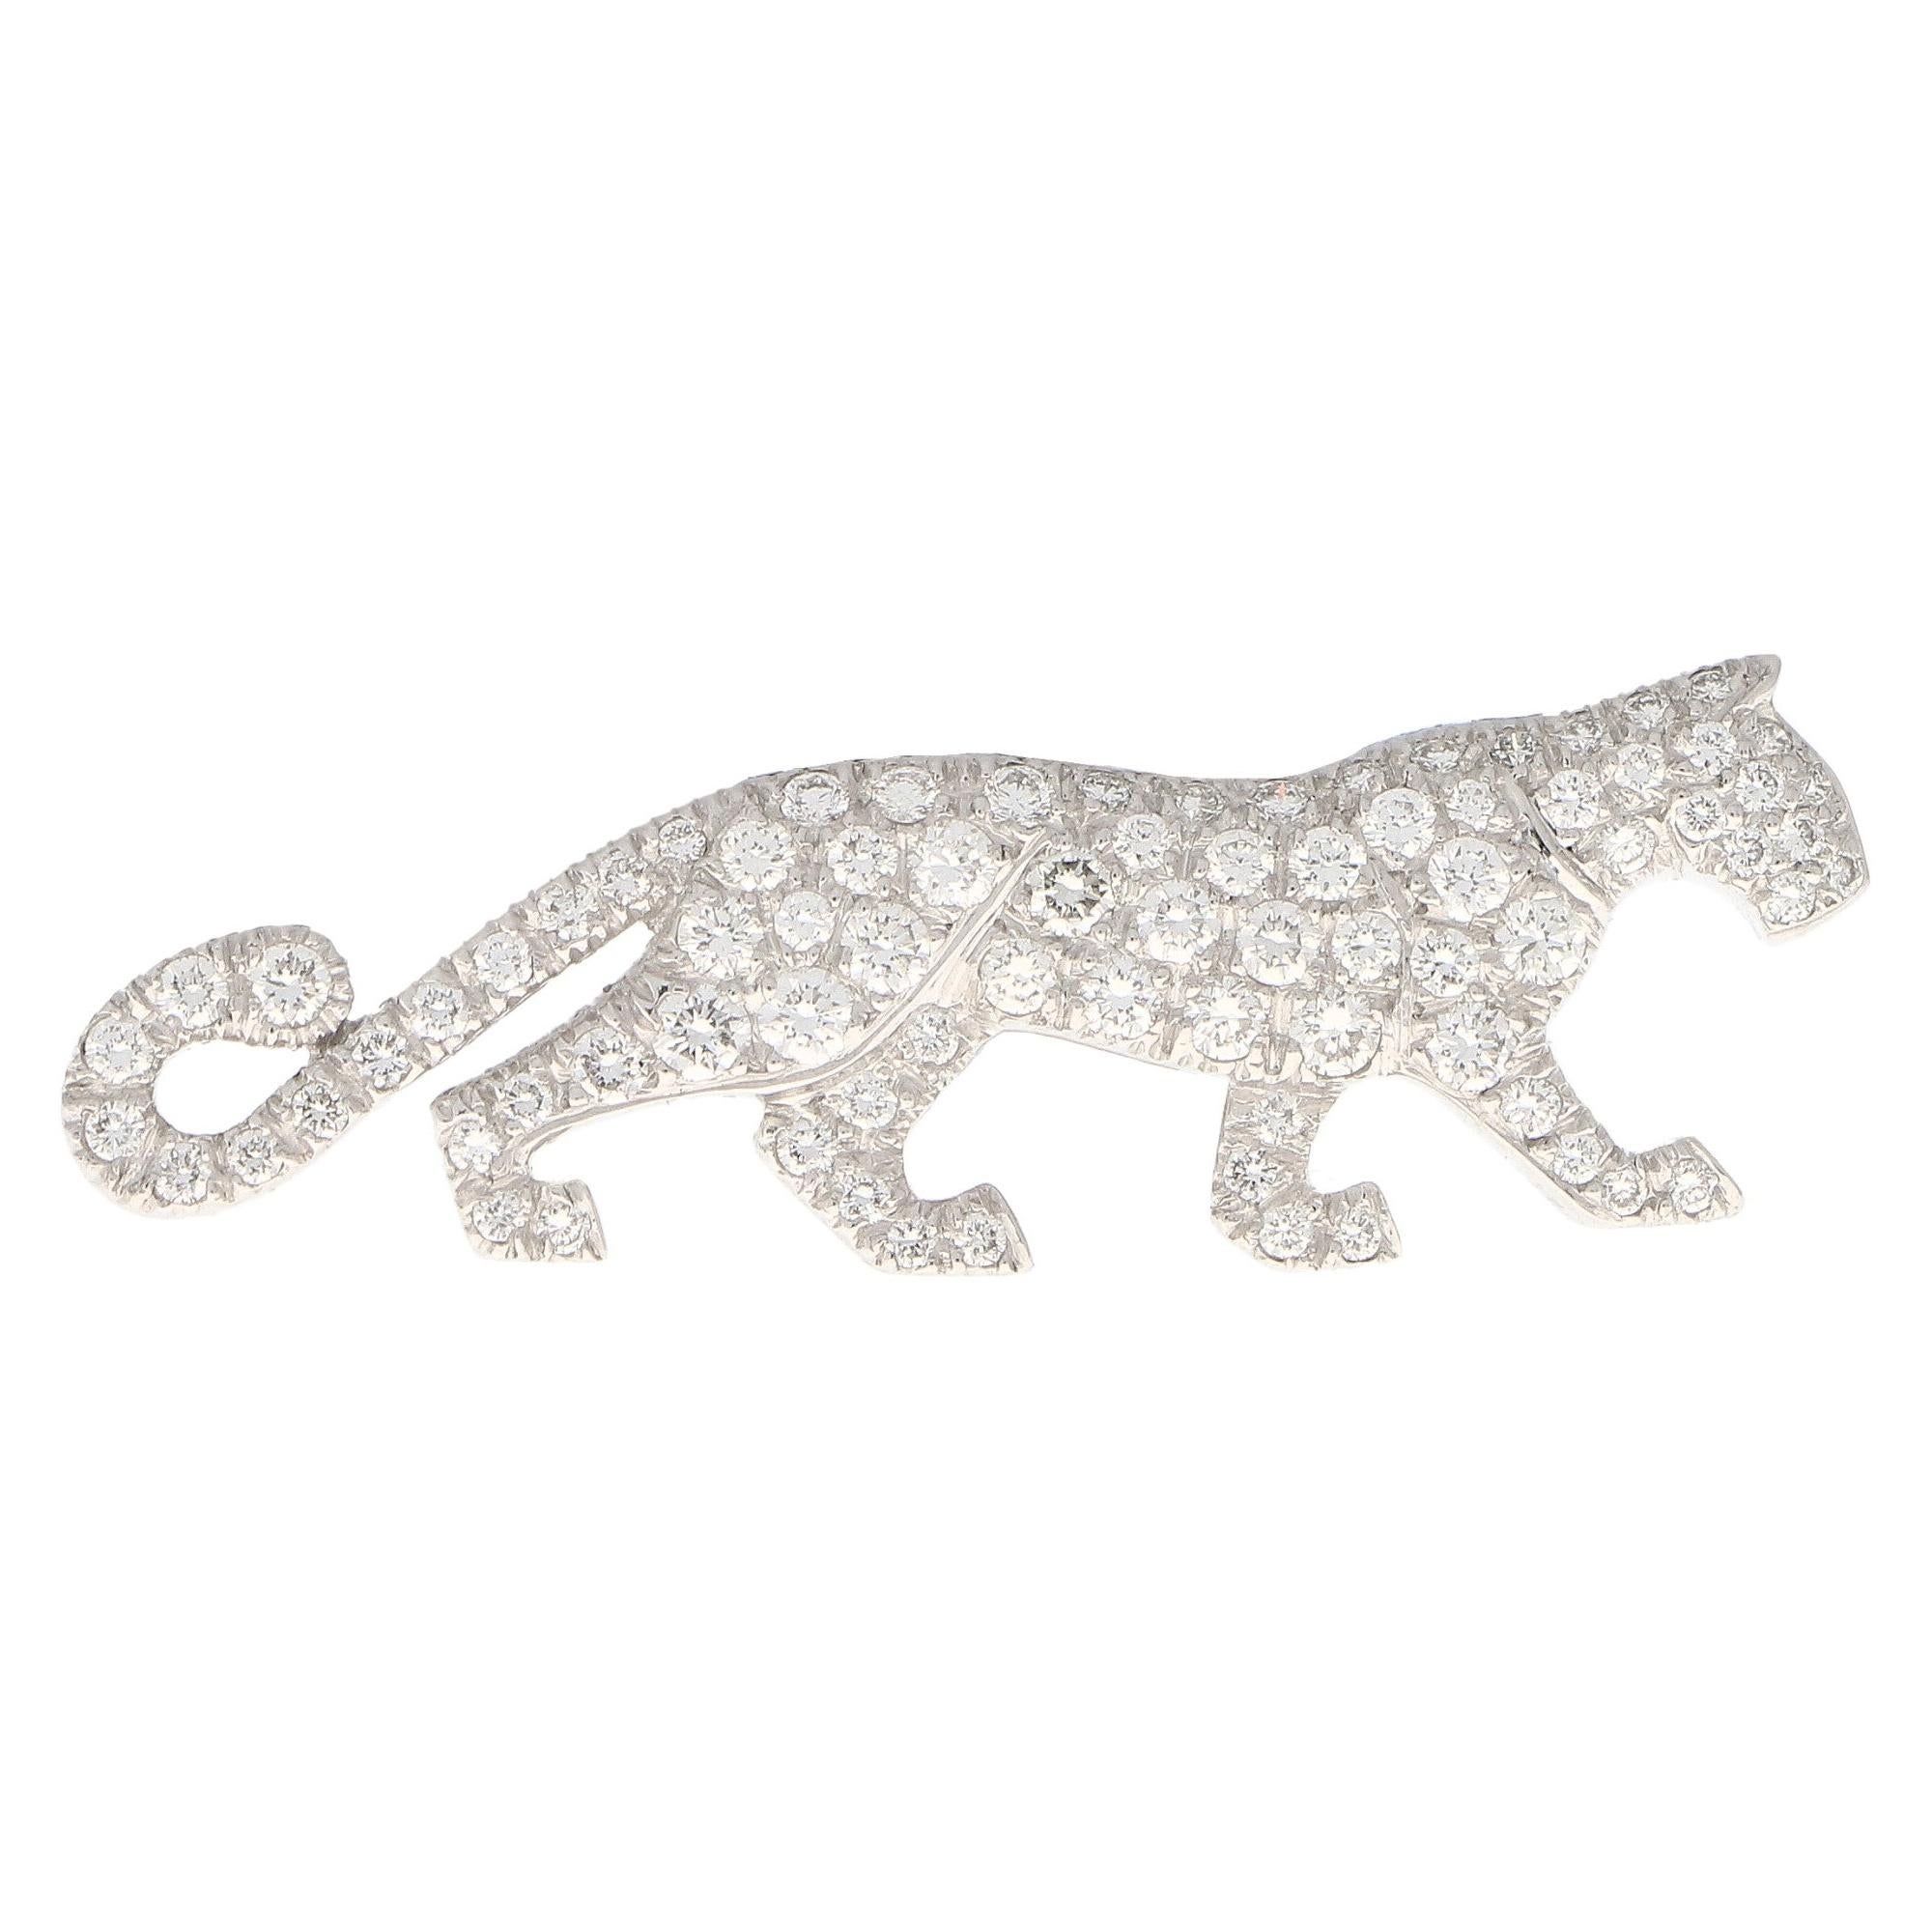 Rare Vintage Cartier Diamond Panther Pin Brooch in 18k White Gold